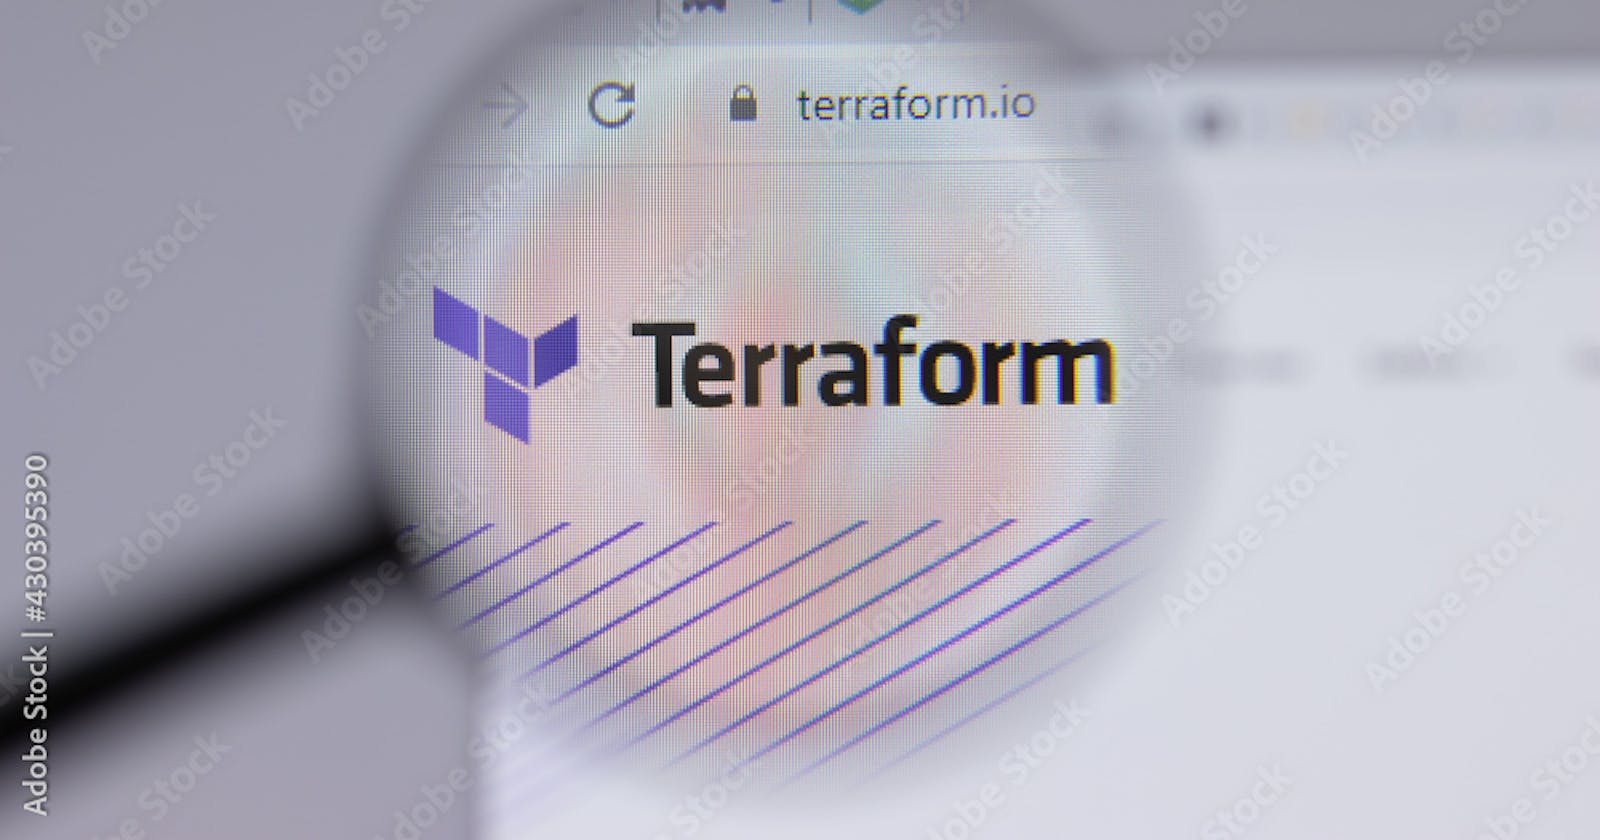 Terraform & it's file structures - Infrastructure as Code (IaC)